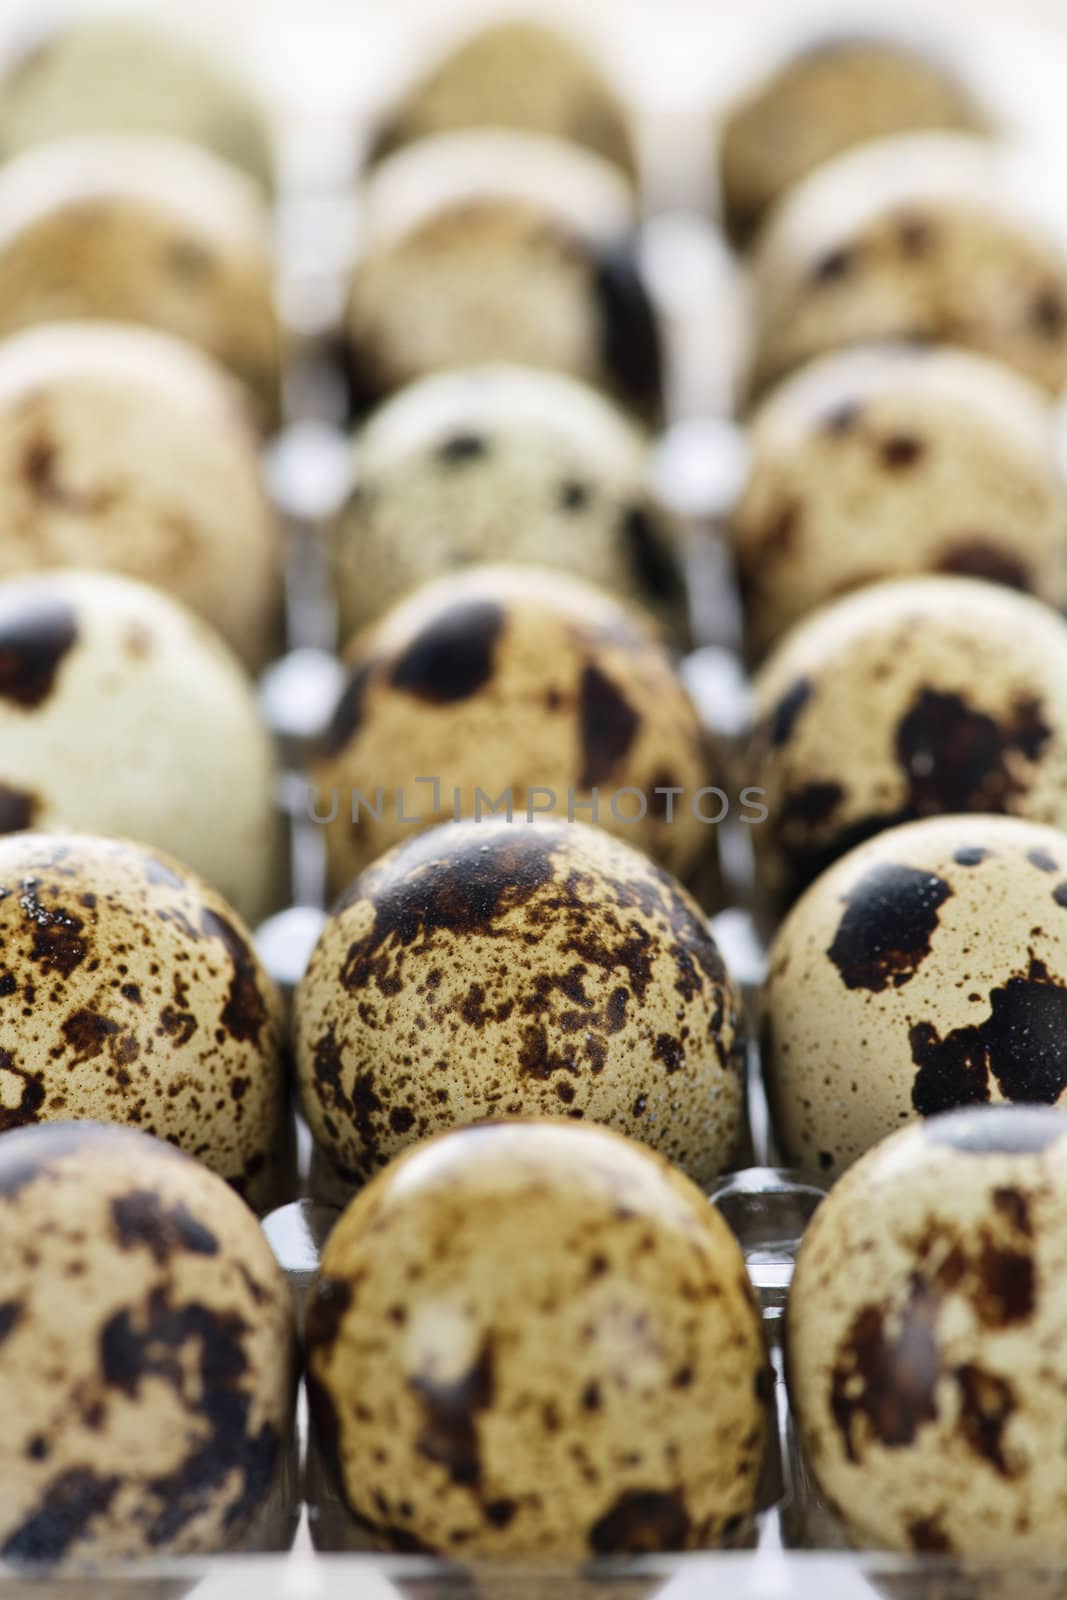 Many small spotted quail eggs in plastic container